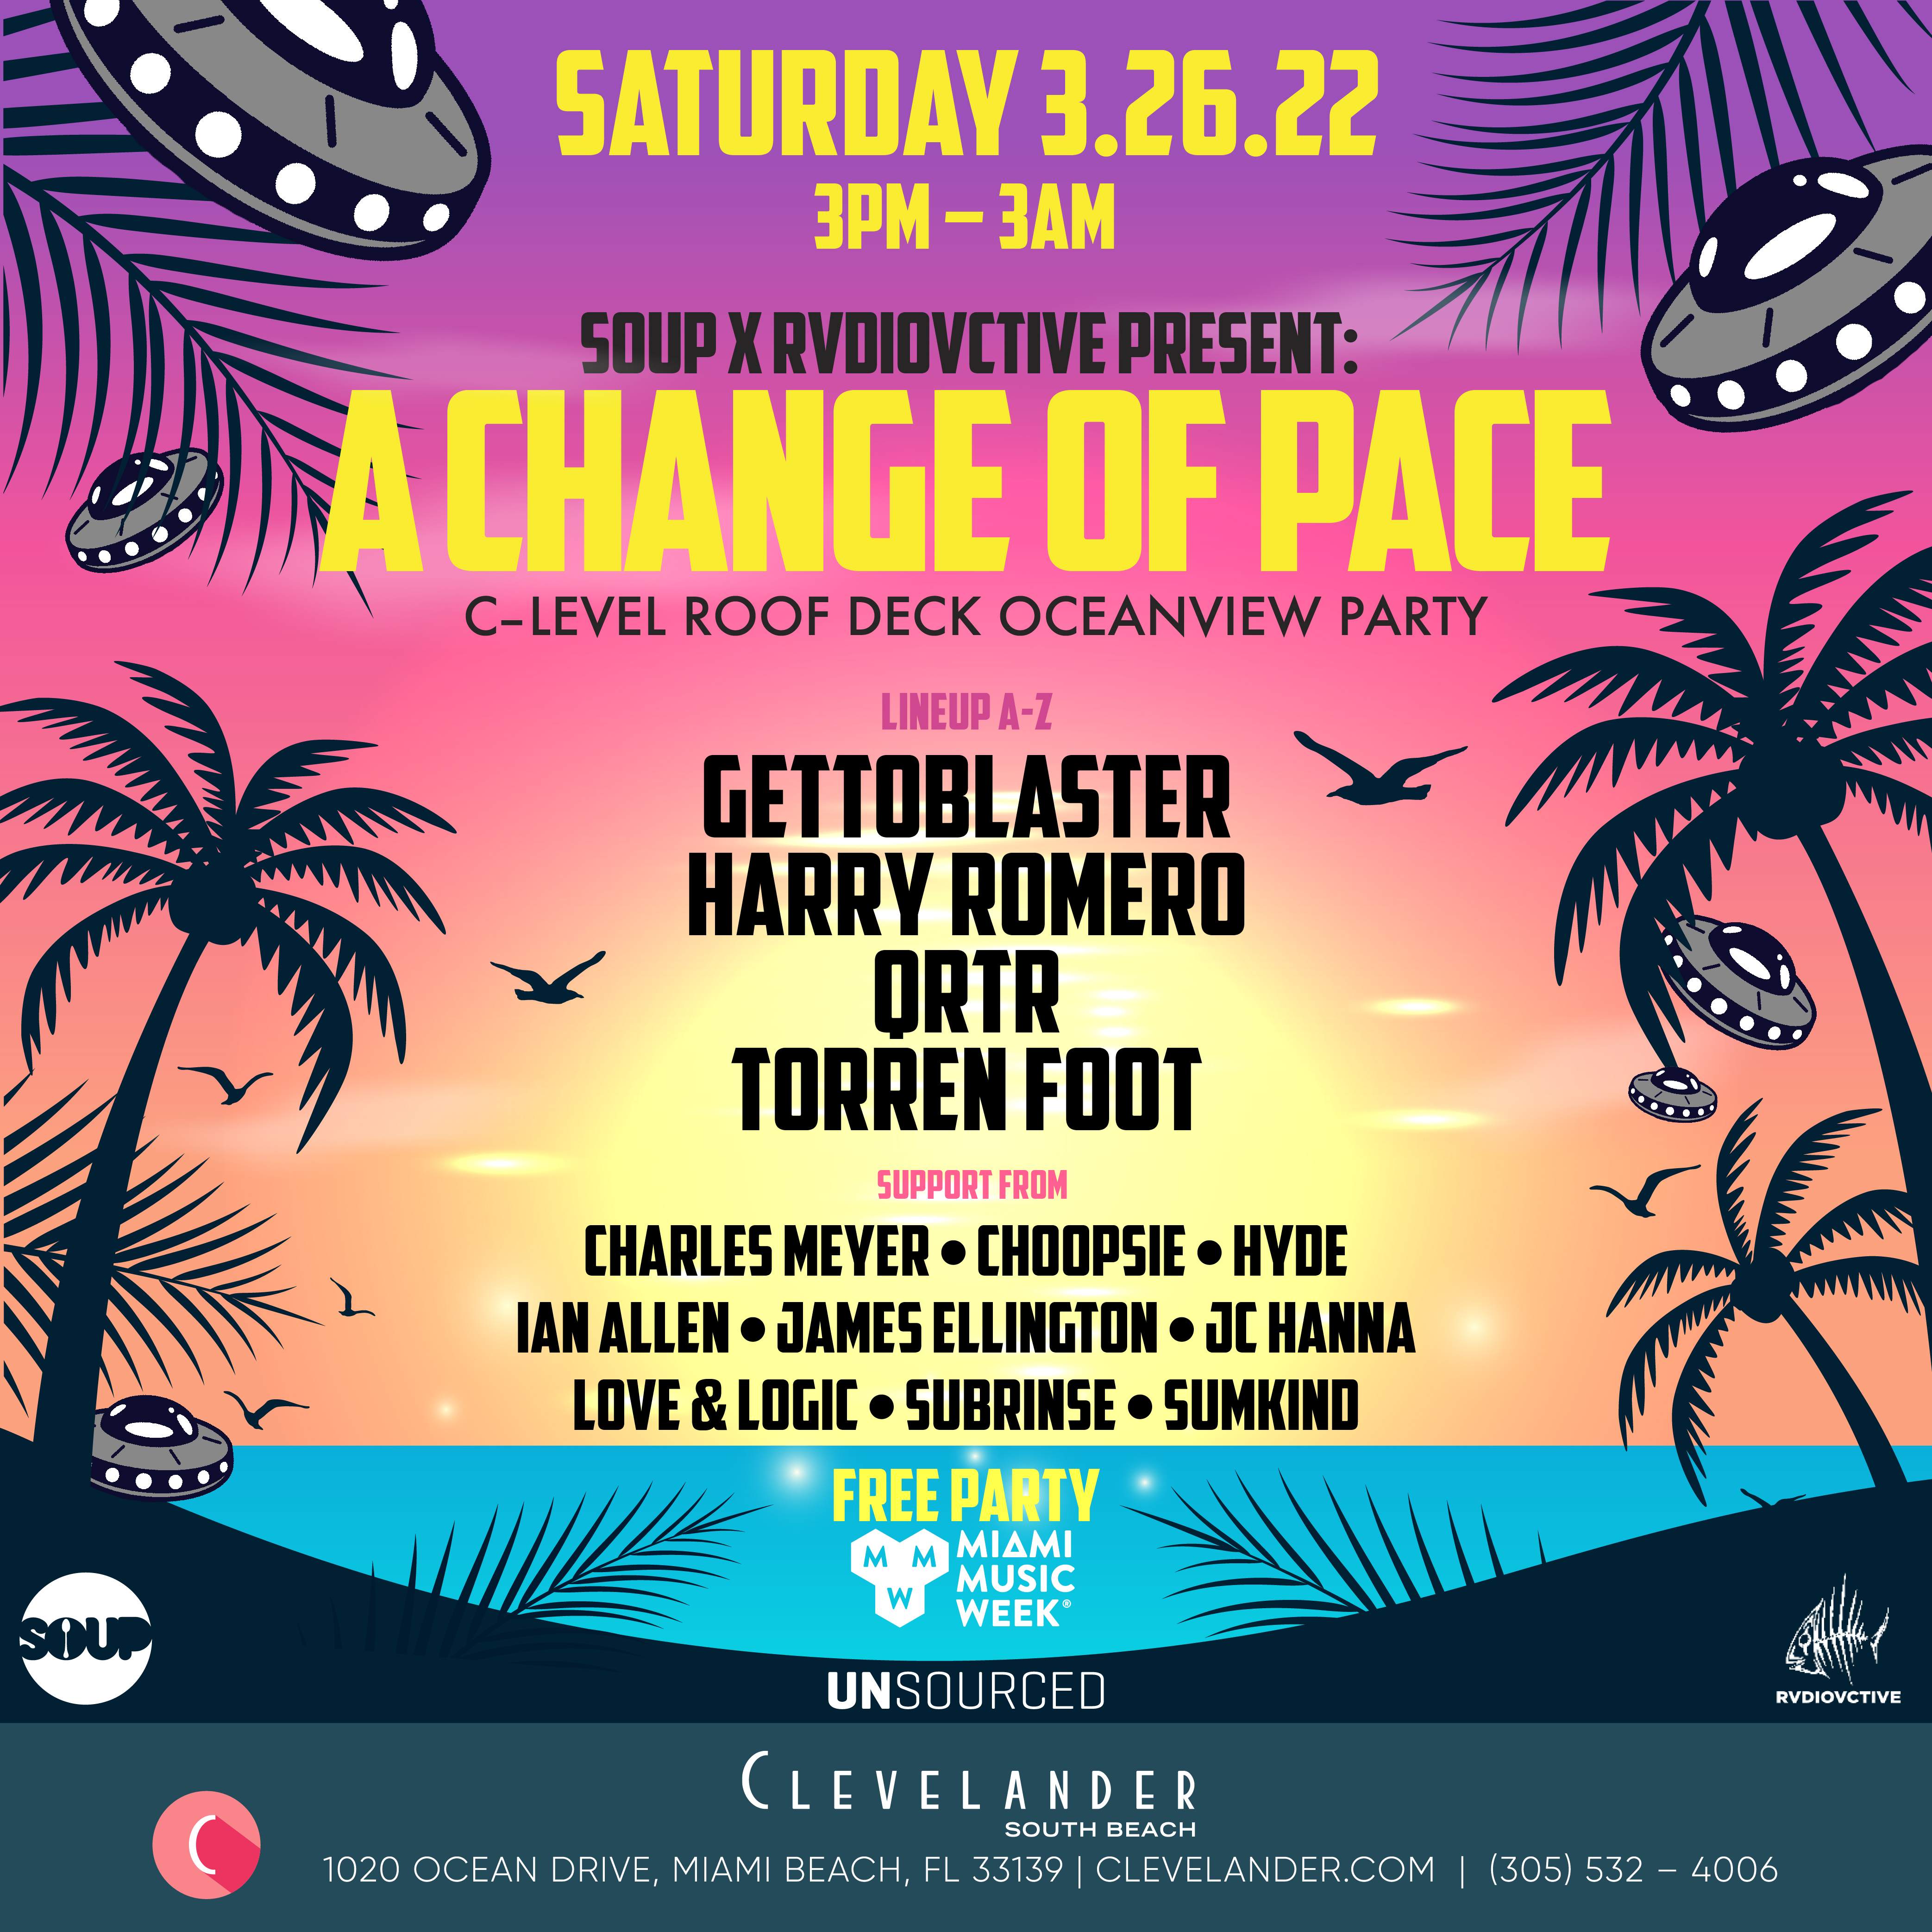 SOUP x RVDIOVCTIVE present: A Change of Pace - Miami Music Week 2022 - フライヤー表